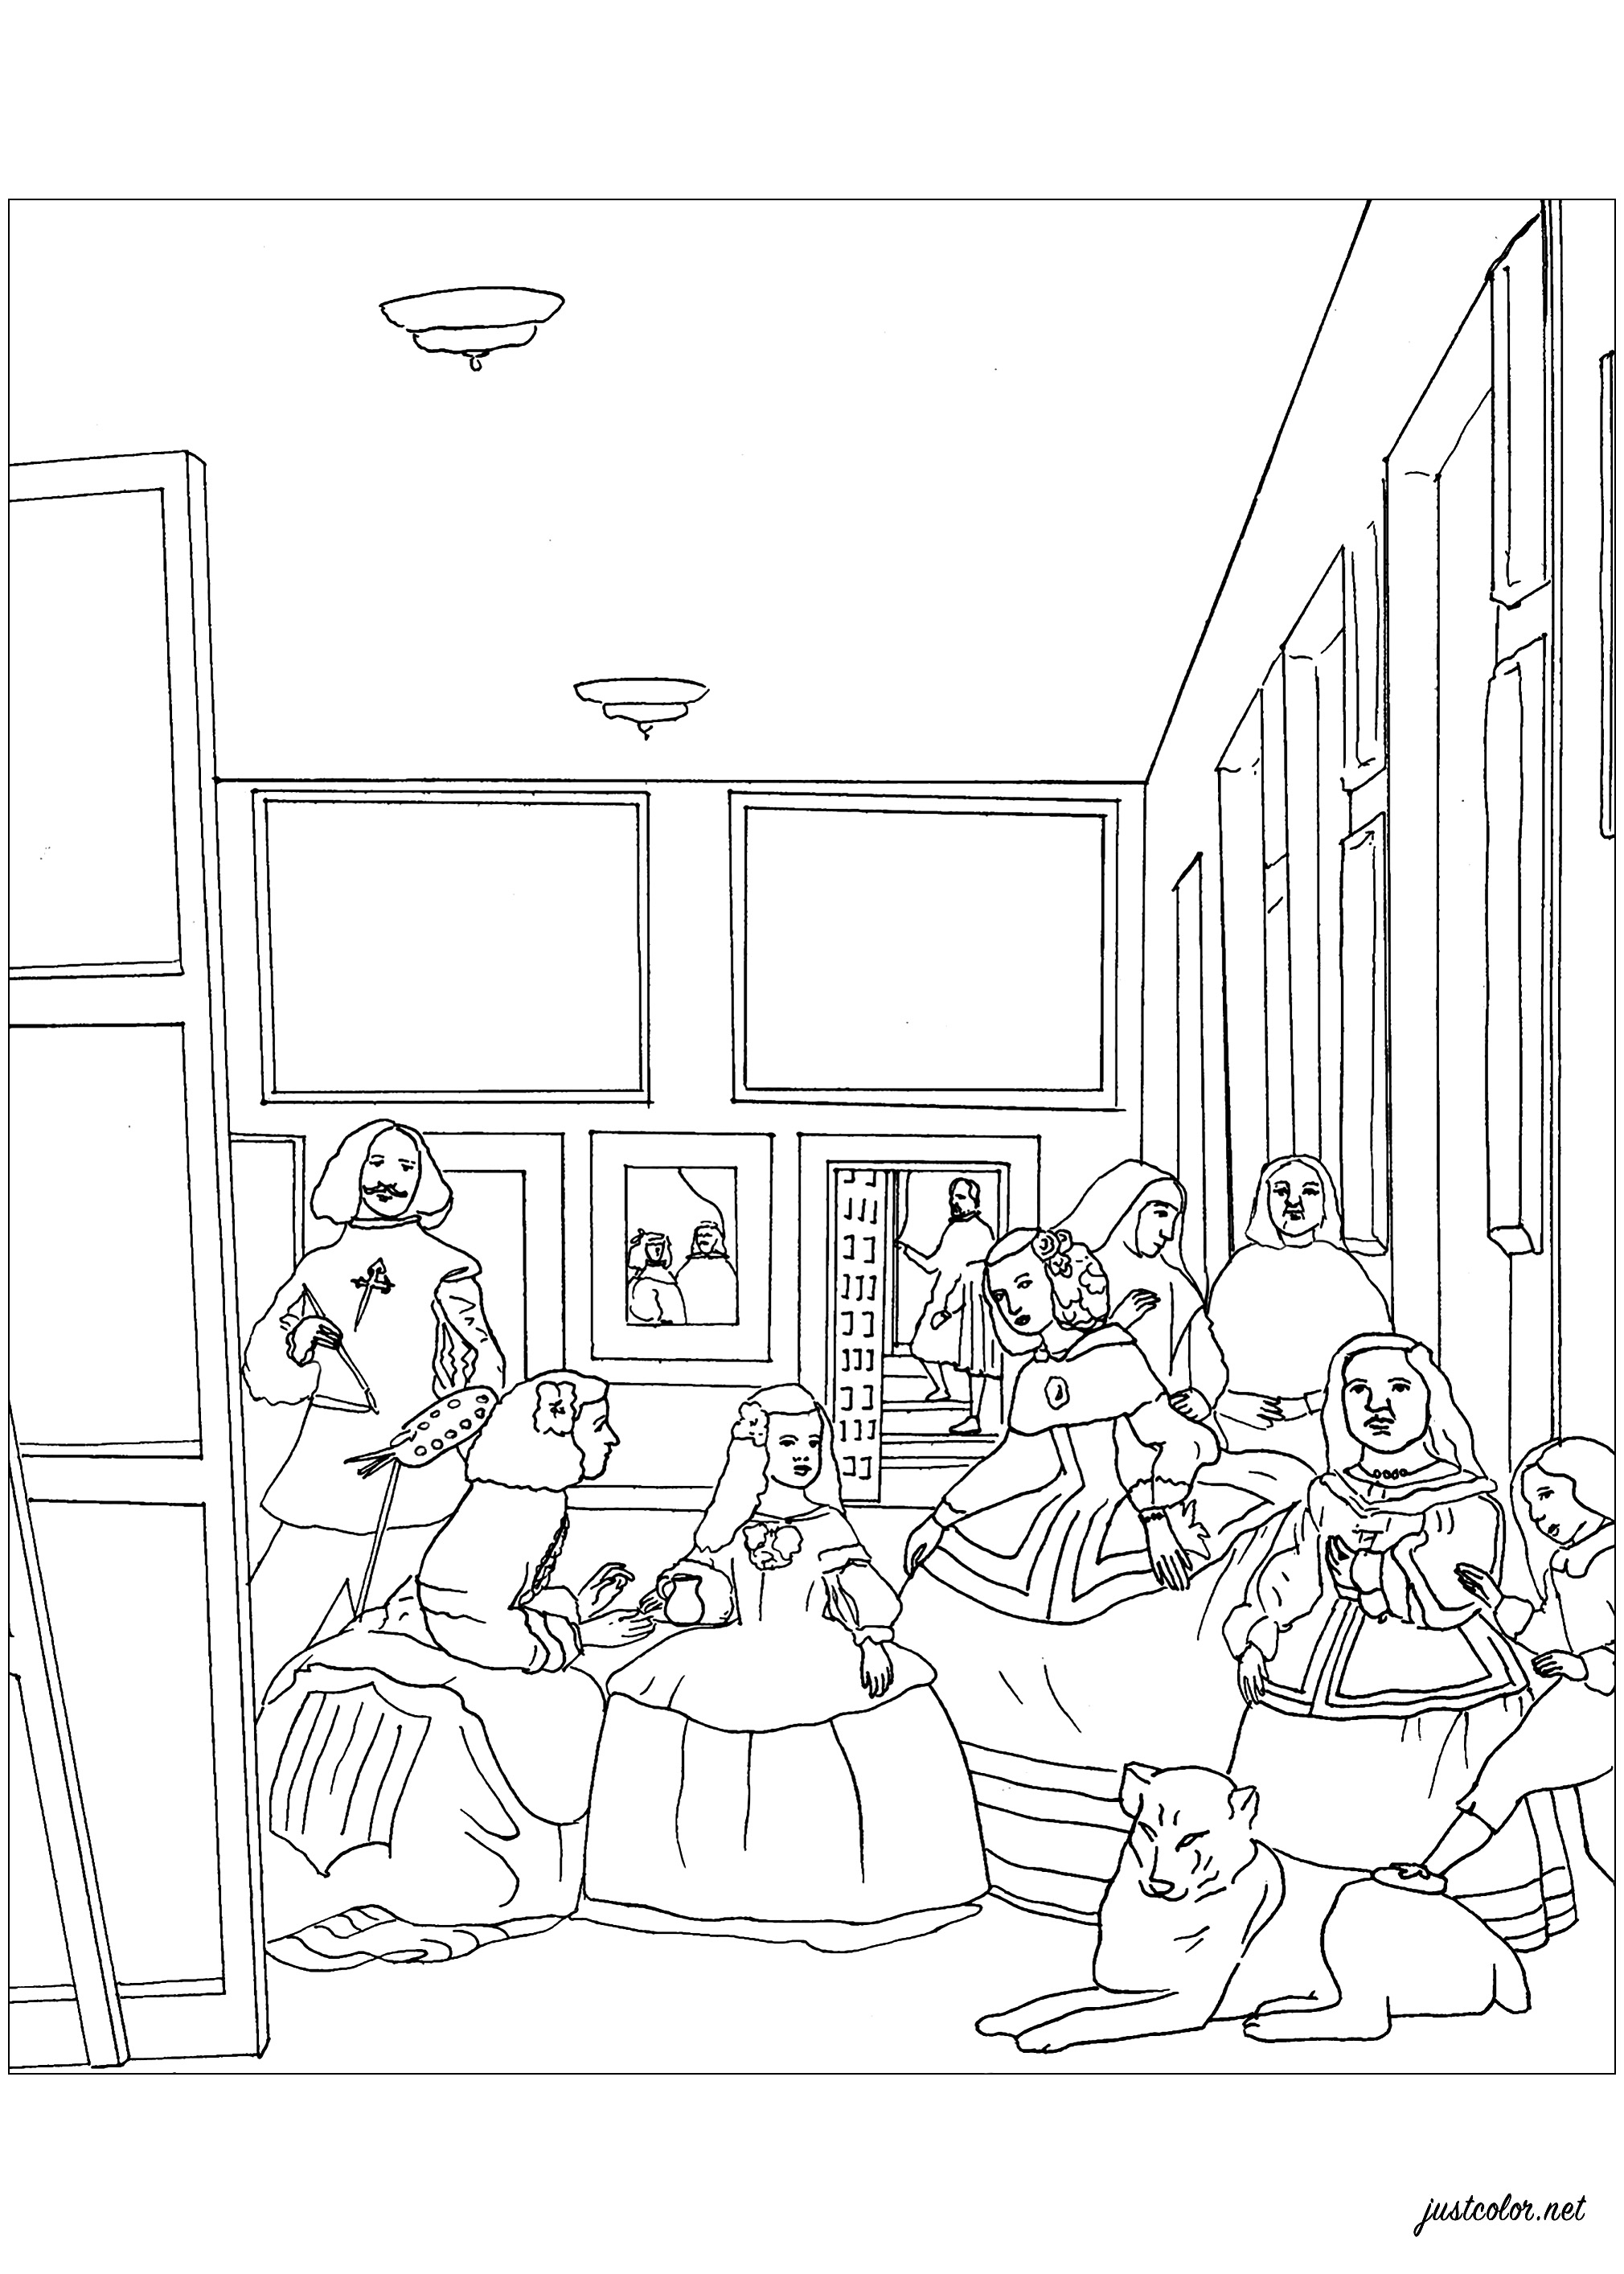 Coloring page created from Diego Velasquez's famous painting 'Las Meninas' (1656).  'One of the most famous and controversial artworks of all time, Las Meninas (The Maids of Honour) is regarded as a dialogue between artist and viewer, with its double mirror imagery and sketchy brushwork that brings every figure and object in the room to life' (Phaidon's analysis)